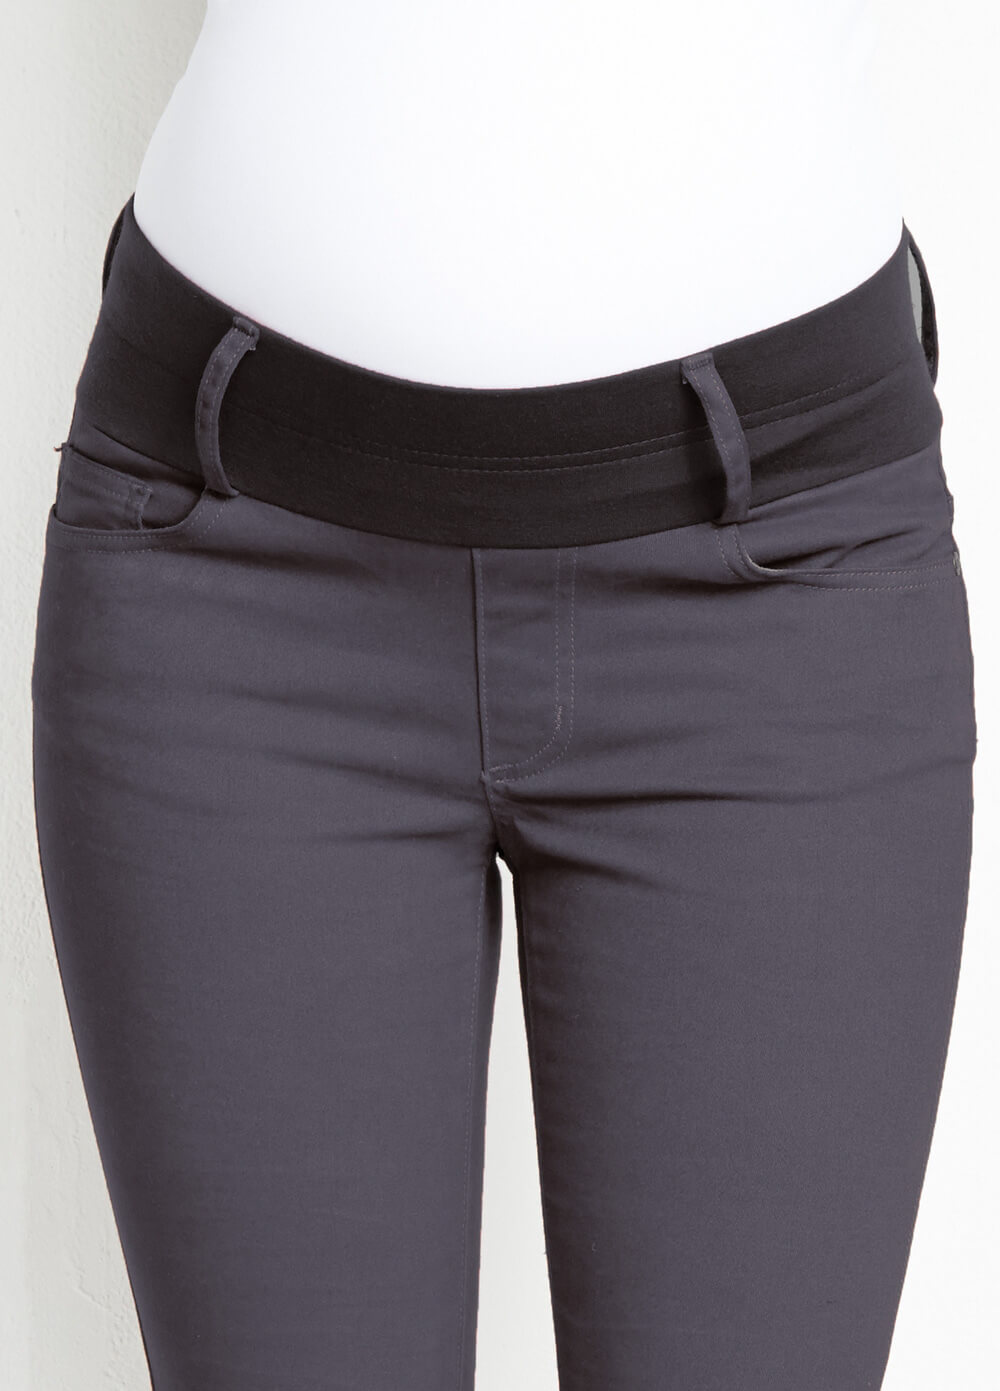 Skinny Maternity Ankle Jeans in Cement Grey by Maternal America 